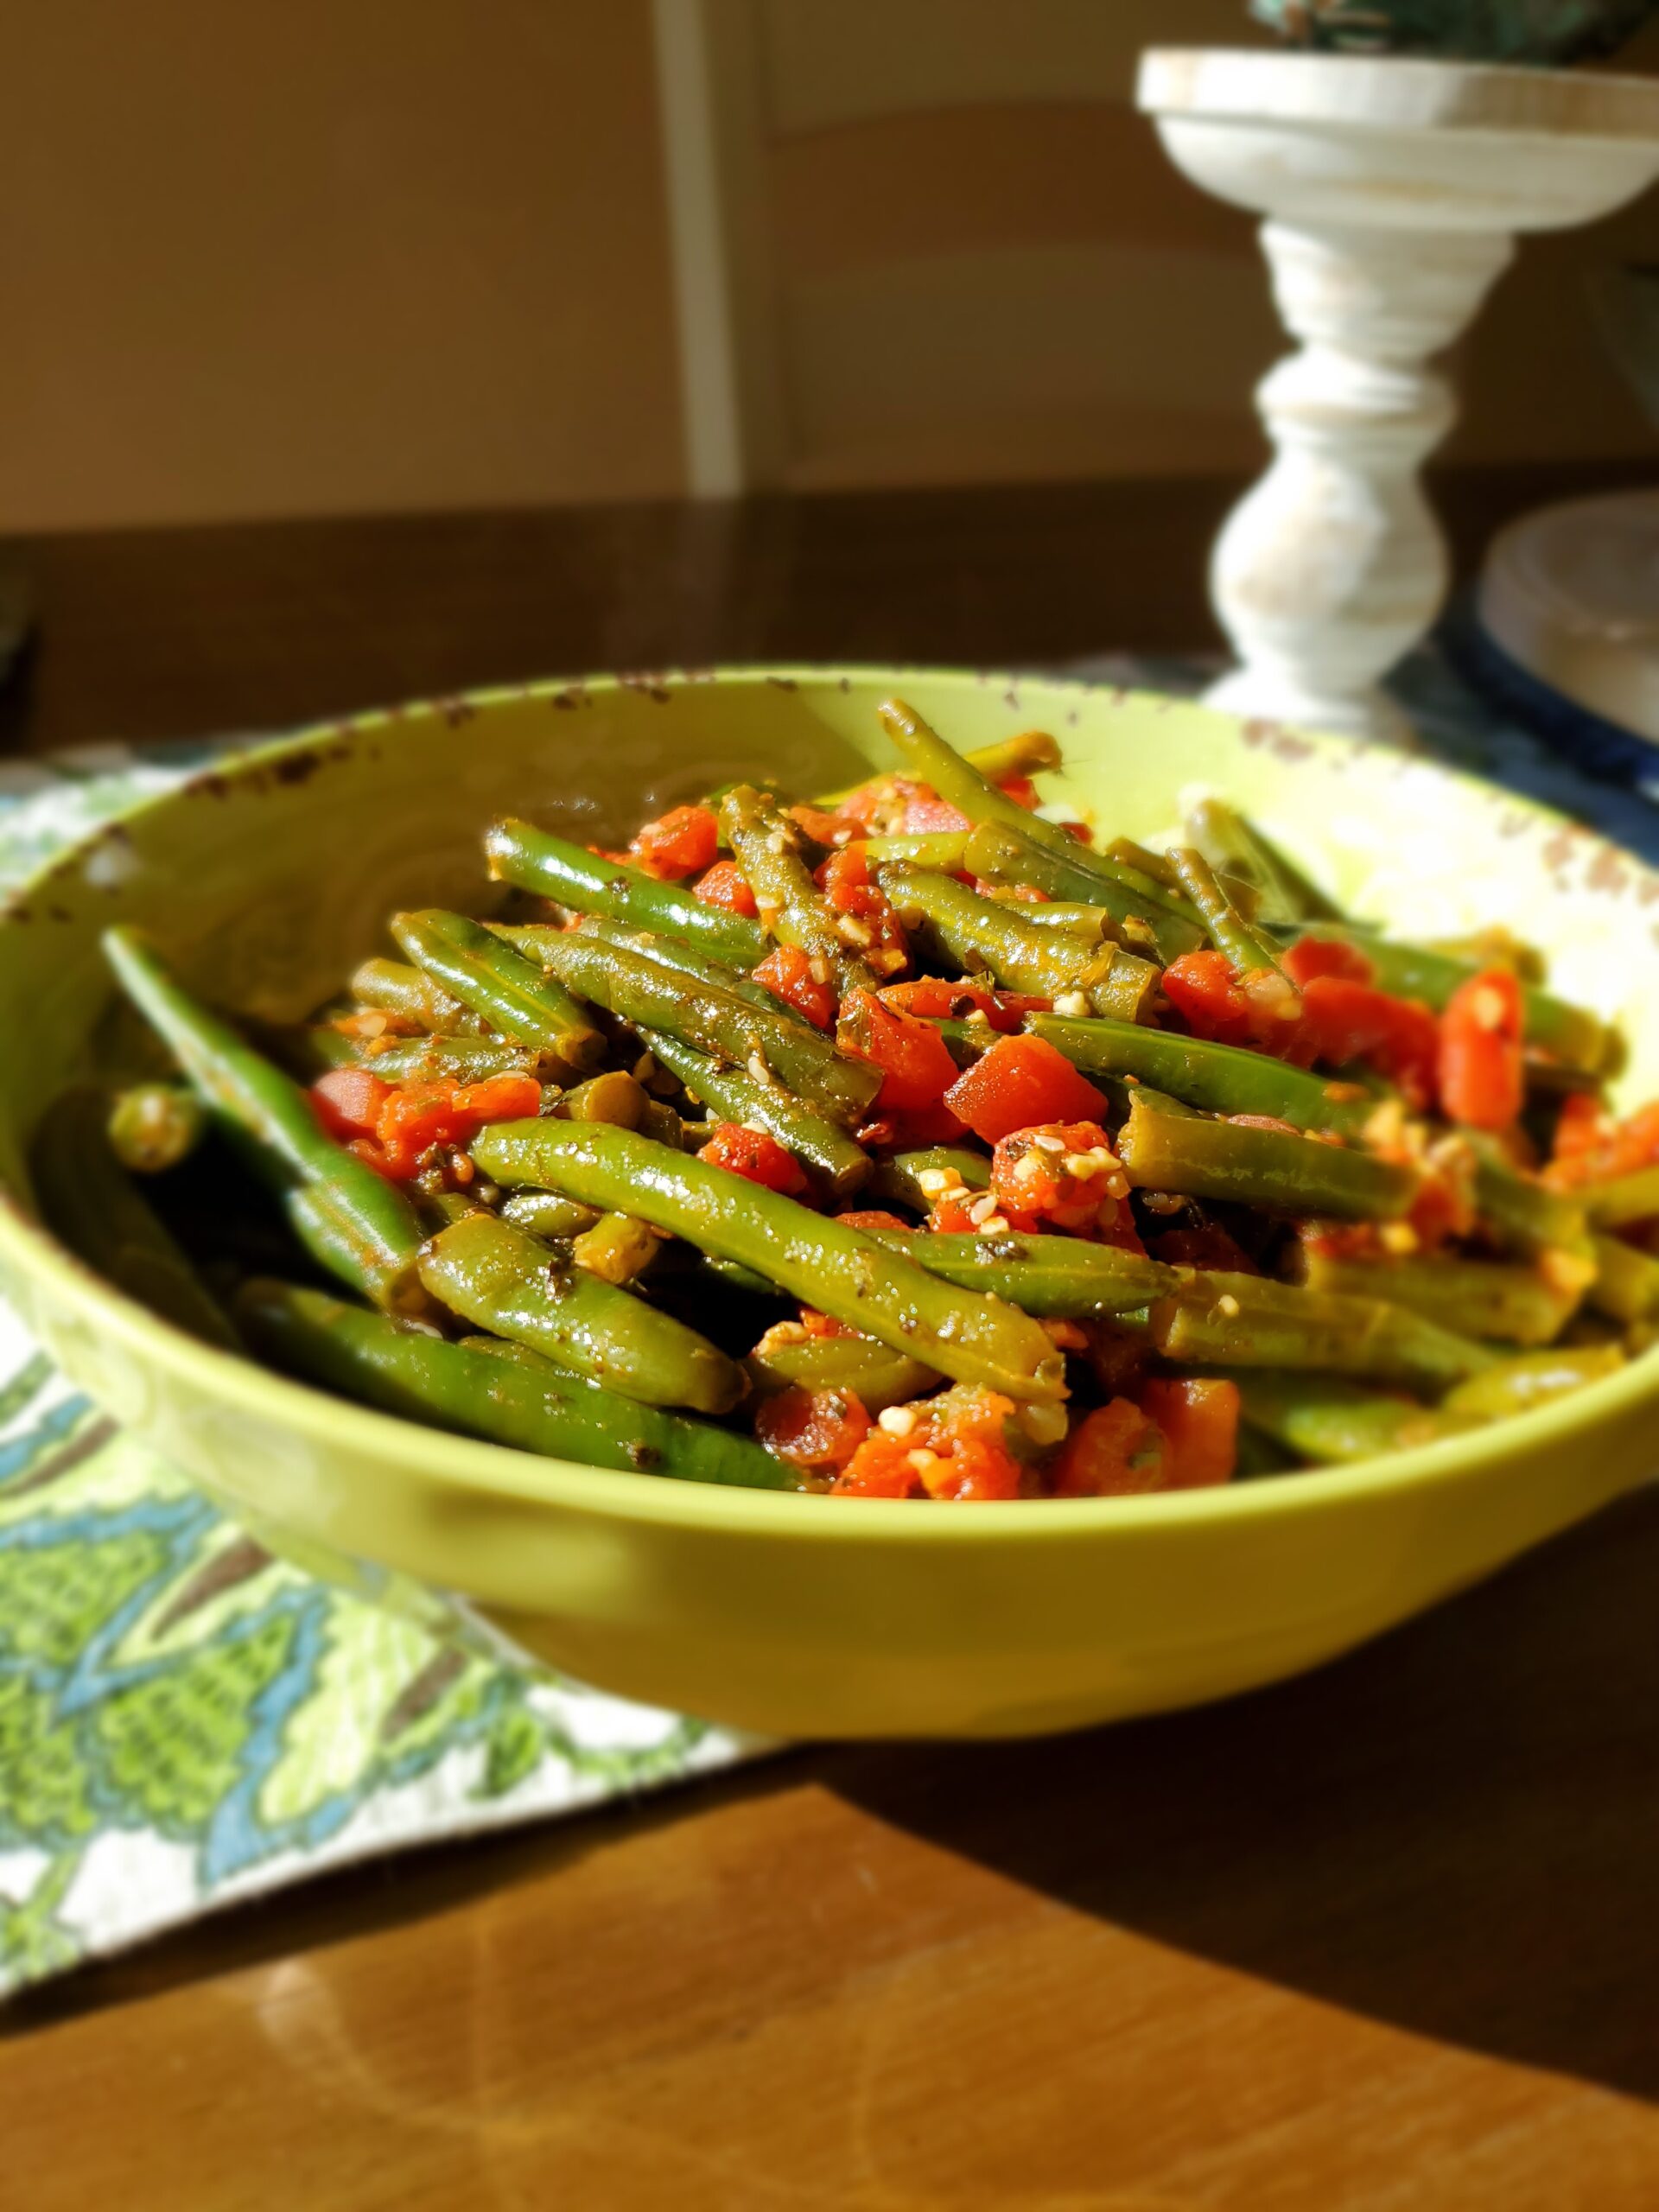 Divinely Dippin’ Green Beans With A Tomato Chaser